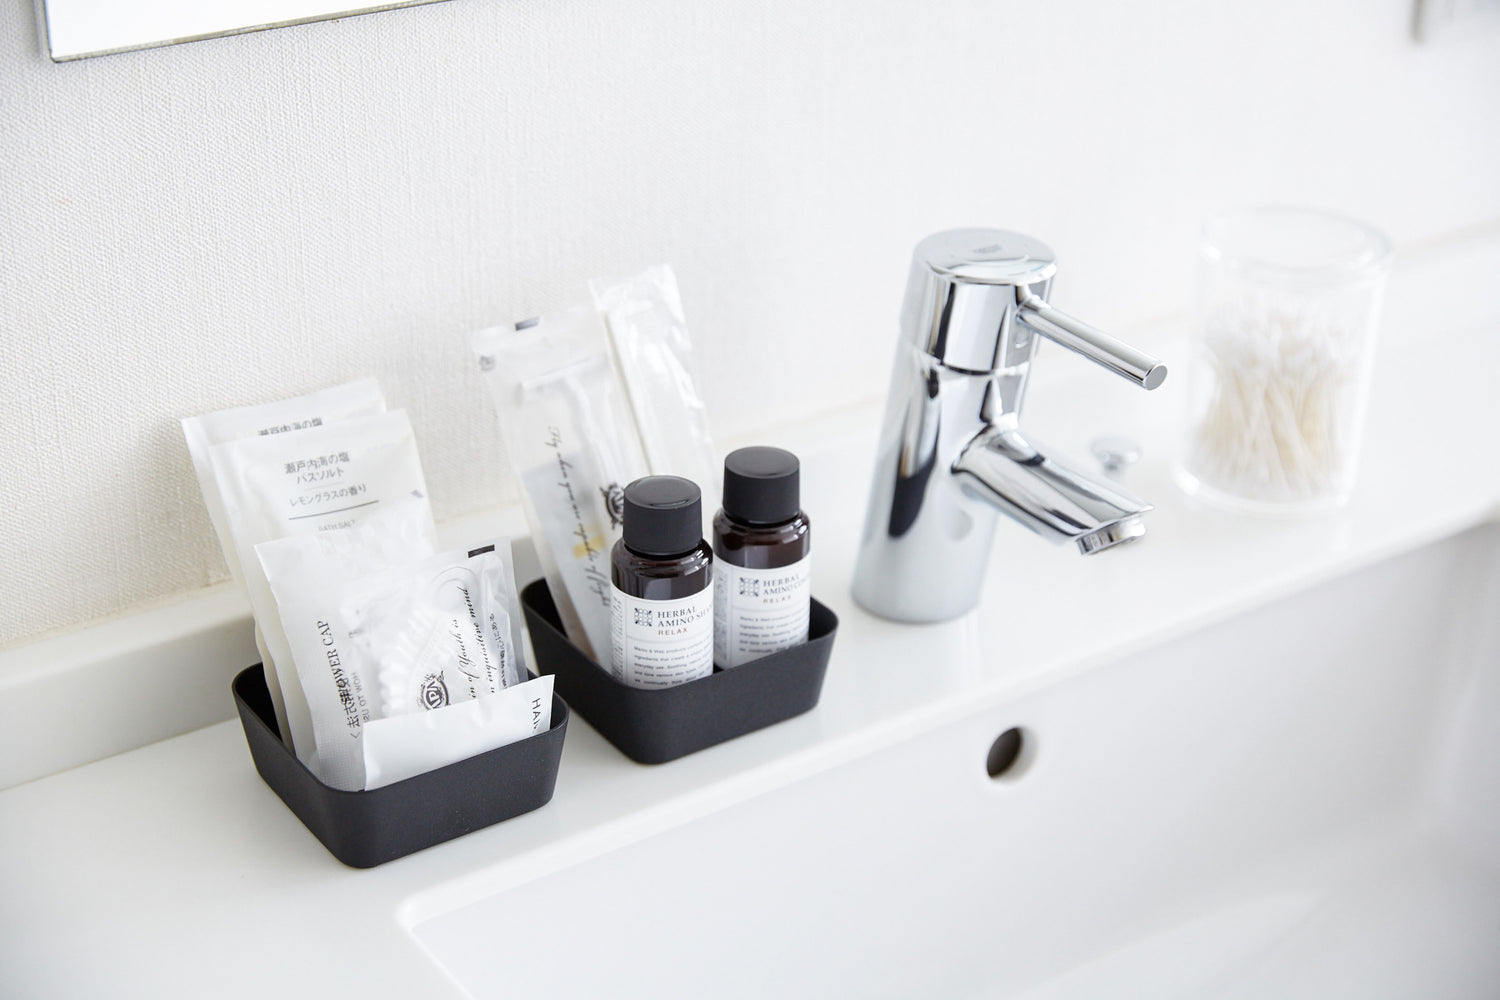 View 8 - Black Accessory Tray holding beauty products on sink counter in bathroom by Yamazaki Home.